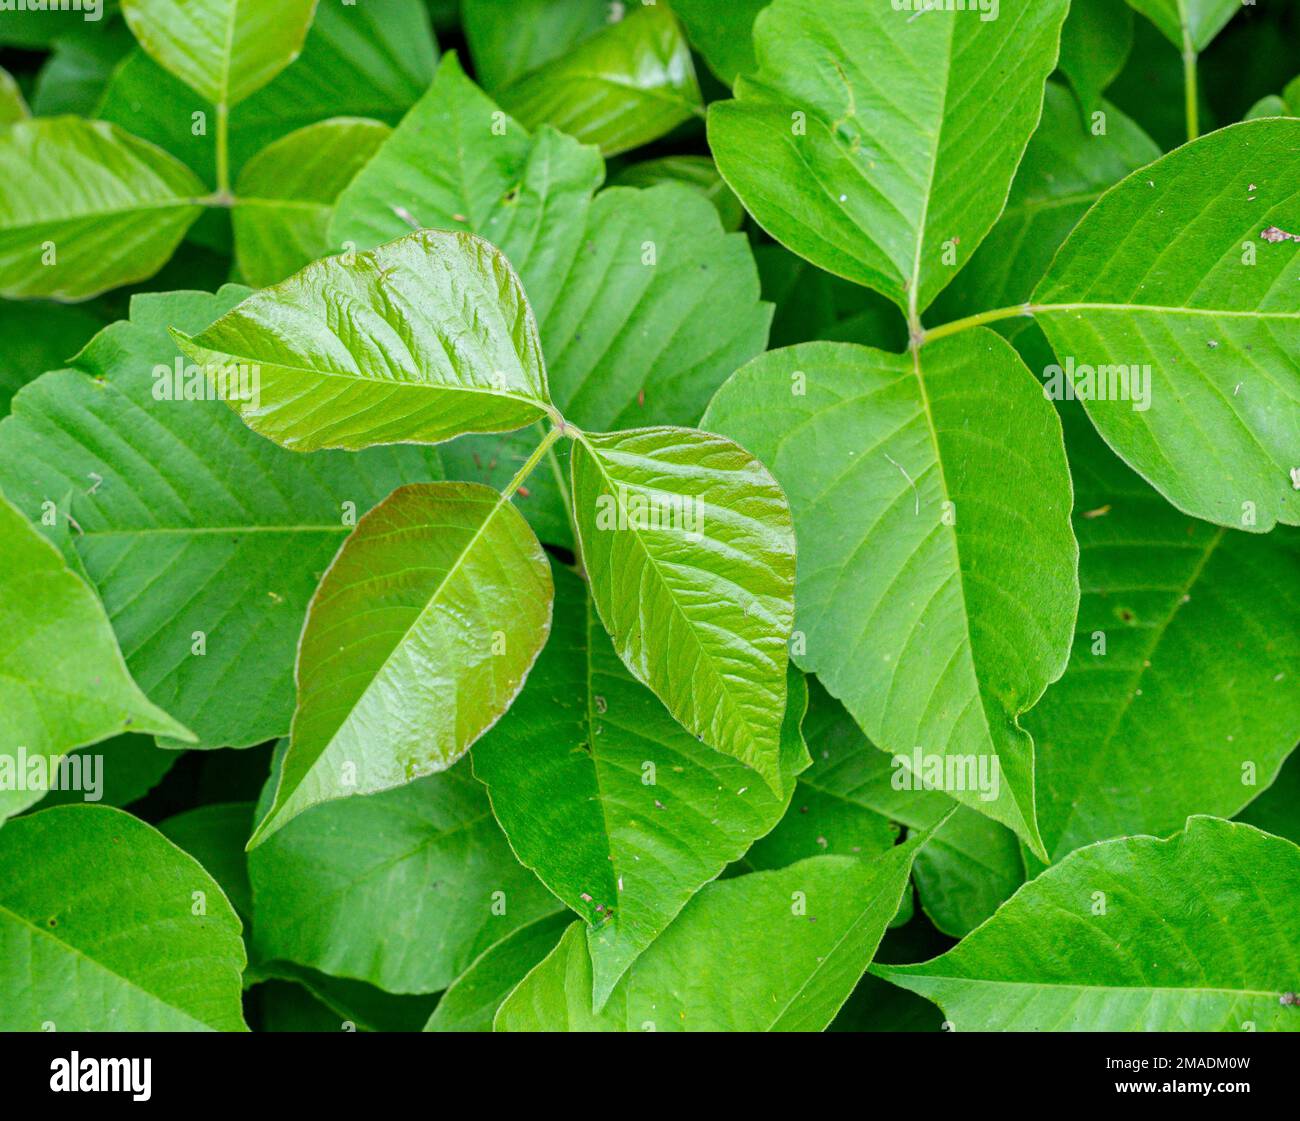 Poison Ivy growing in the Spring: A large patch of the poisonous plants along the side of a path. The glossy leaves of one plant stand out. Stock Photo